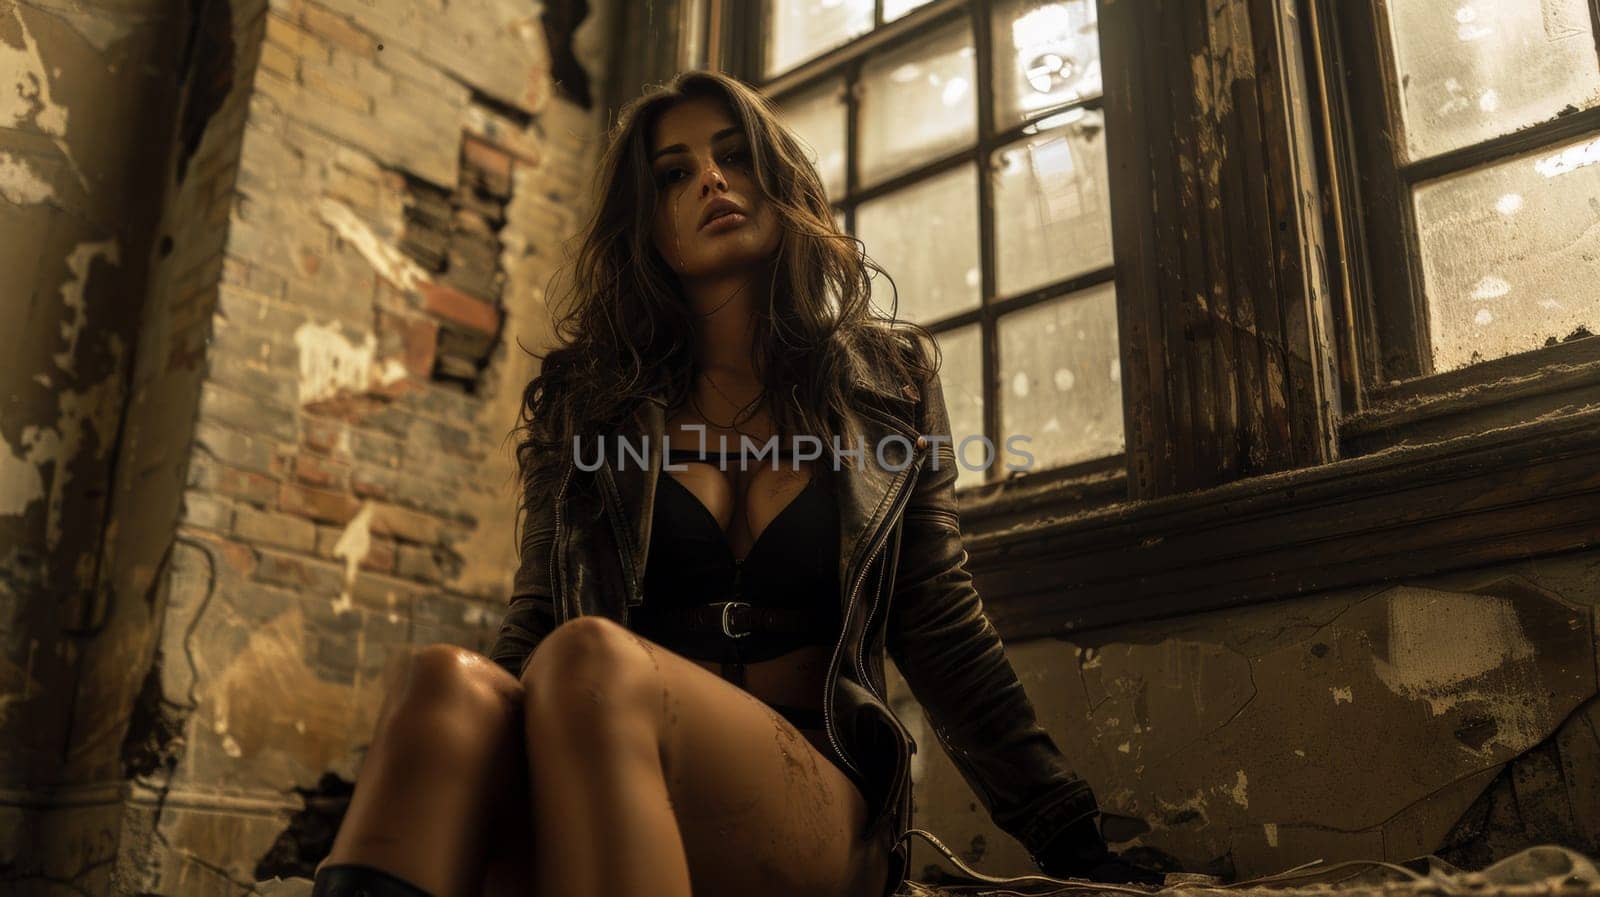 A woman in a black leather jacket sitting on the floor